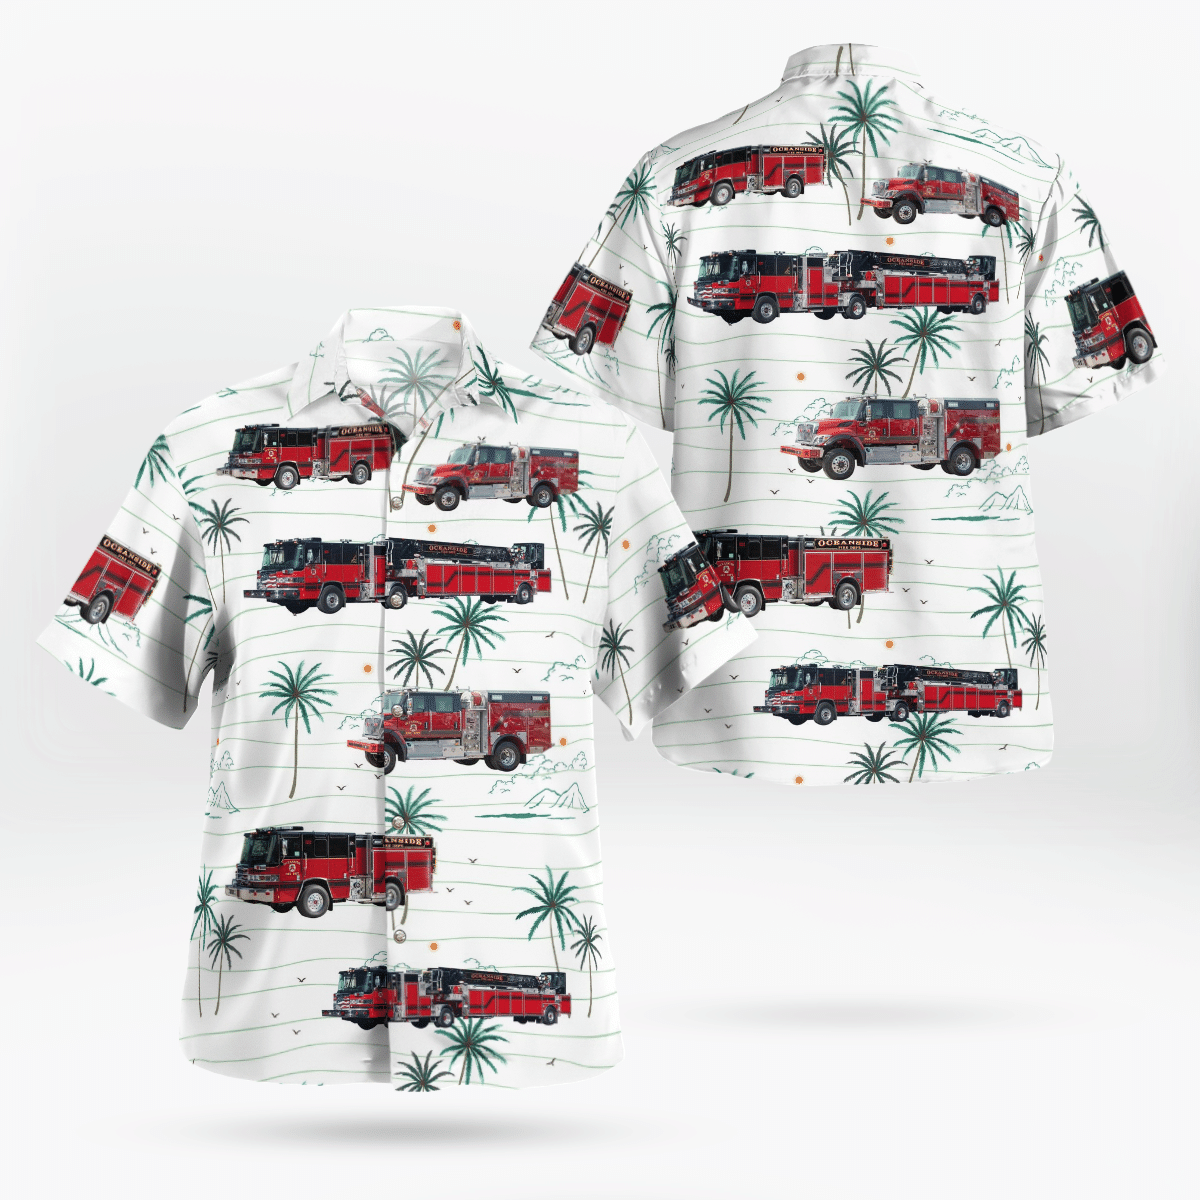 This Hawaiian Shirt Is The Perfect Summer Piece For Any Beach Vacation Word3